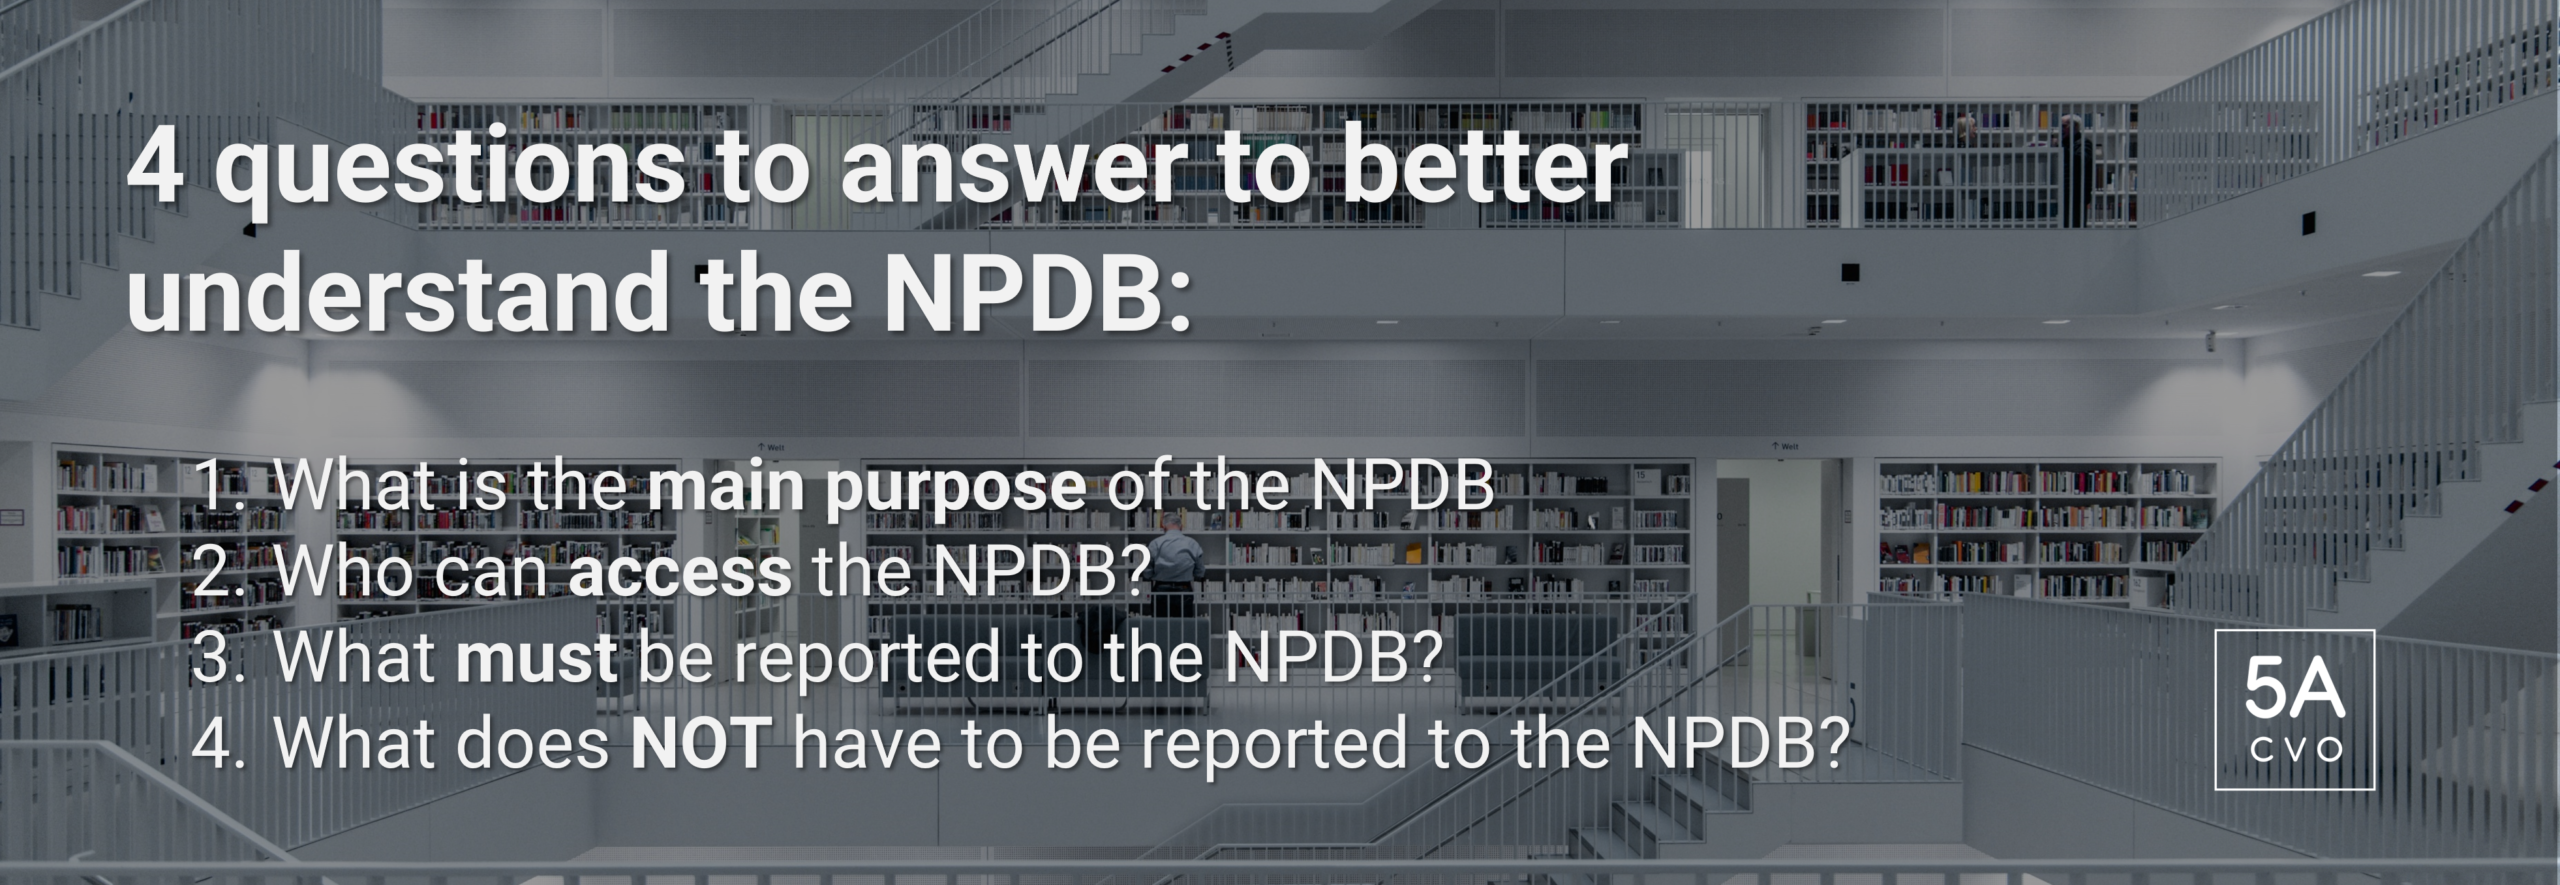 4 Questions To Answer About The NPDB